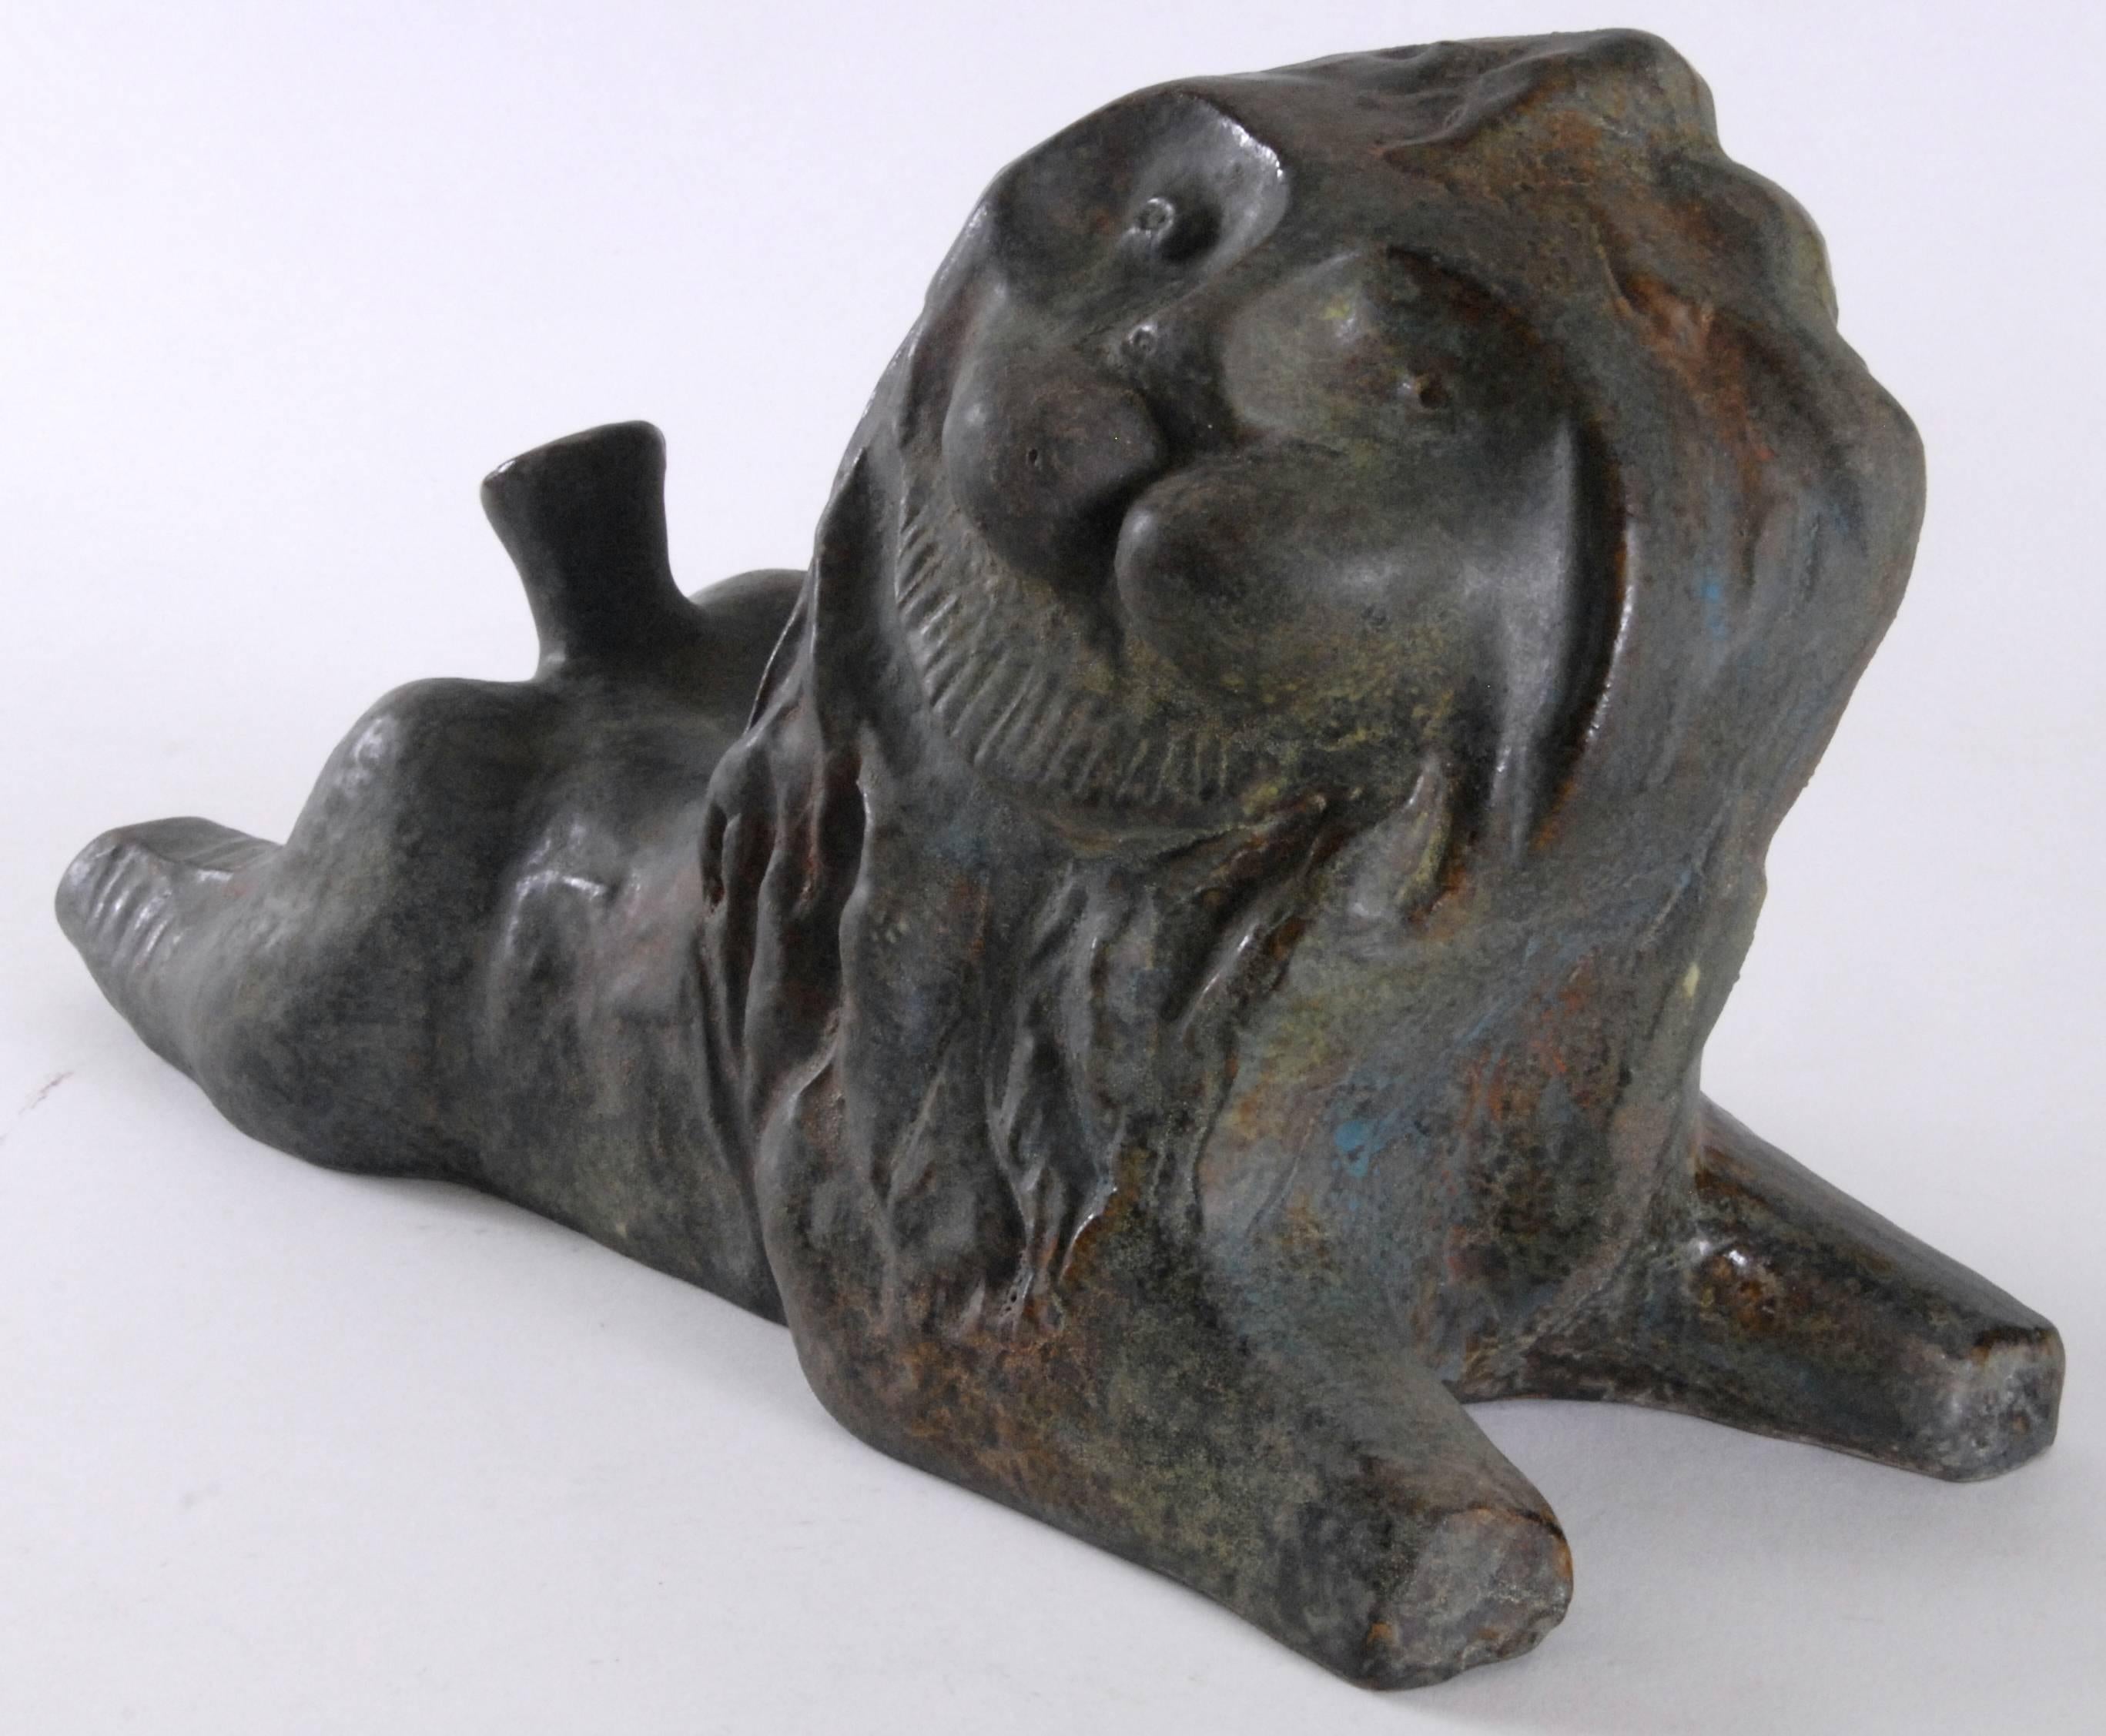 Aldo Londi designed bronze finish lion called 'Pietra', early 1960s. This was also made as a lamp base and finished with different glazes. The 'bronze' finish as here is very rare. See photo with catalogue illustration from the Bitossi Londi